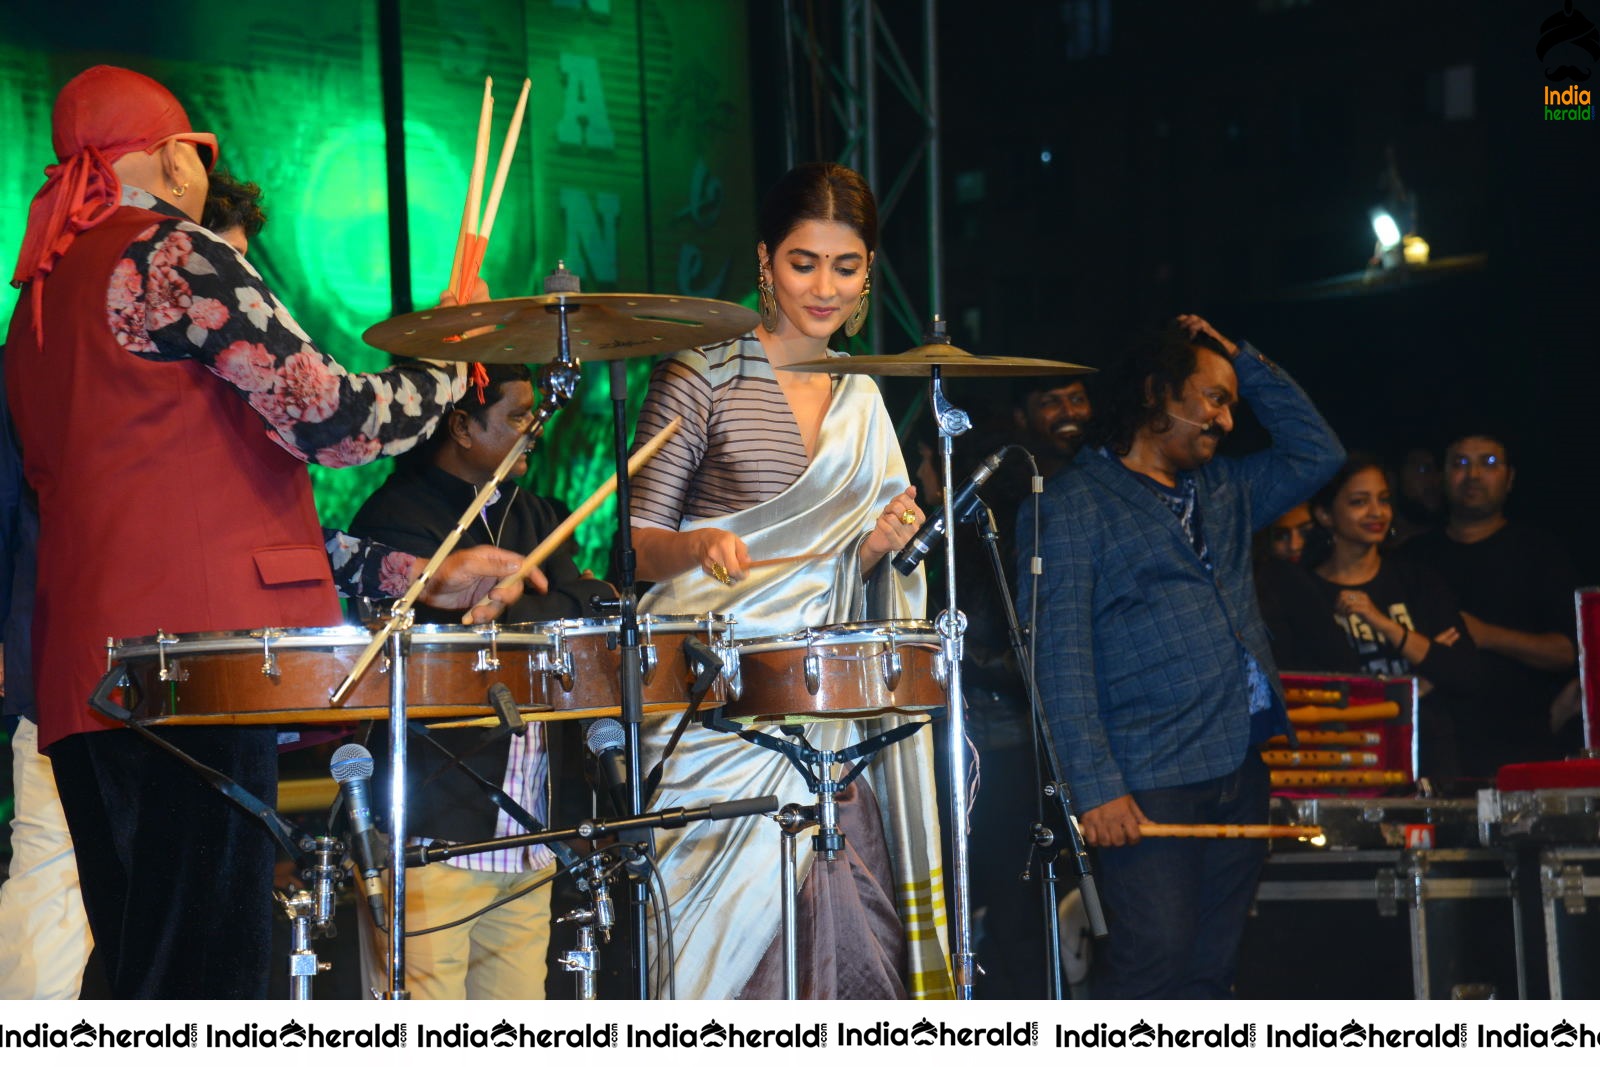 When Pooja Hegde started playing drums along with Sivamani Set 3